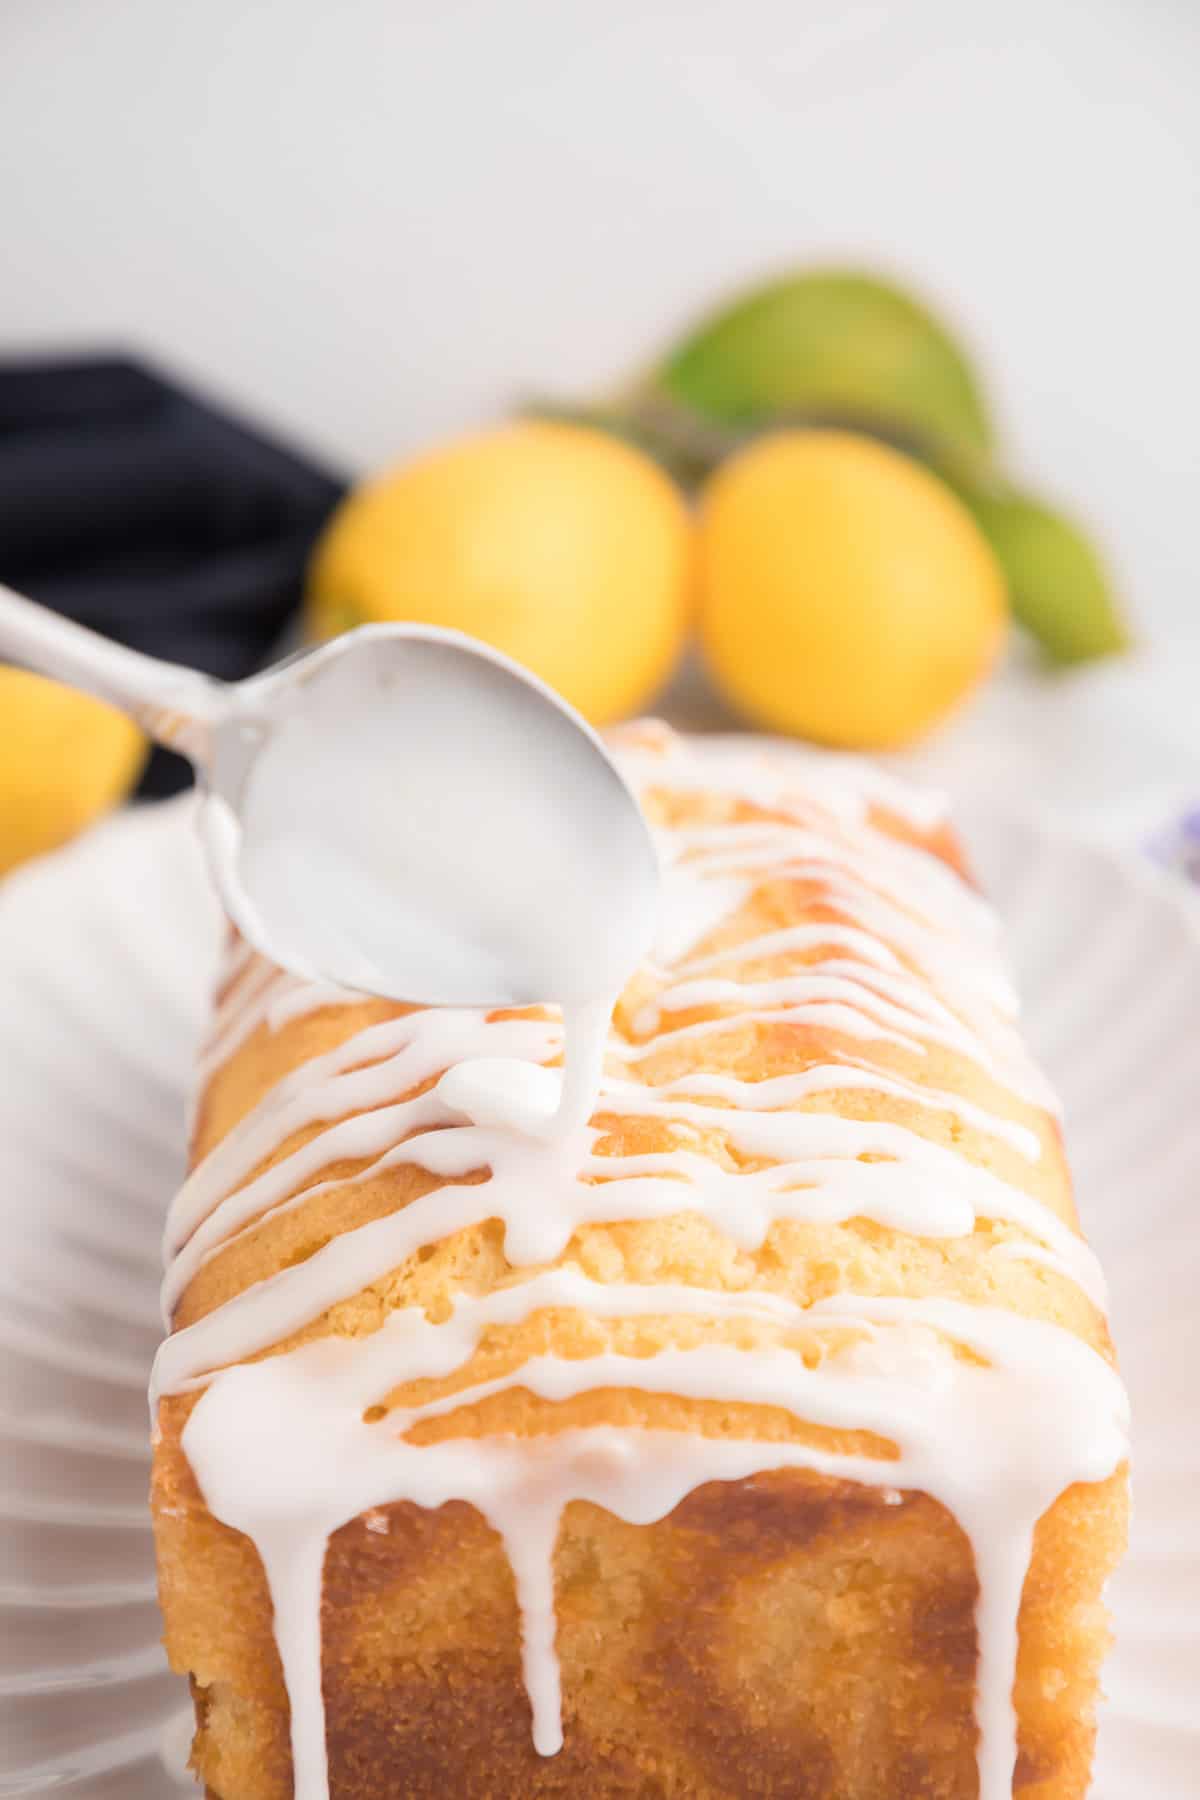 Glaze being drizzled over the top of a lemon cake with lemons and a towel in the background.